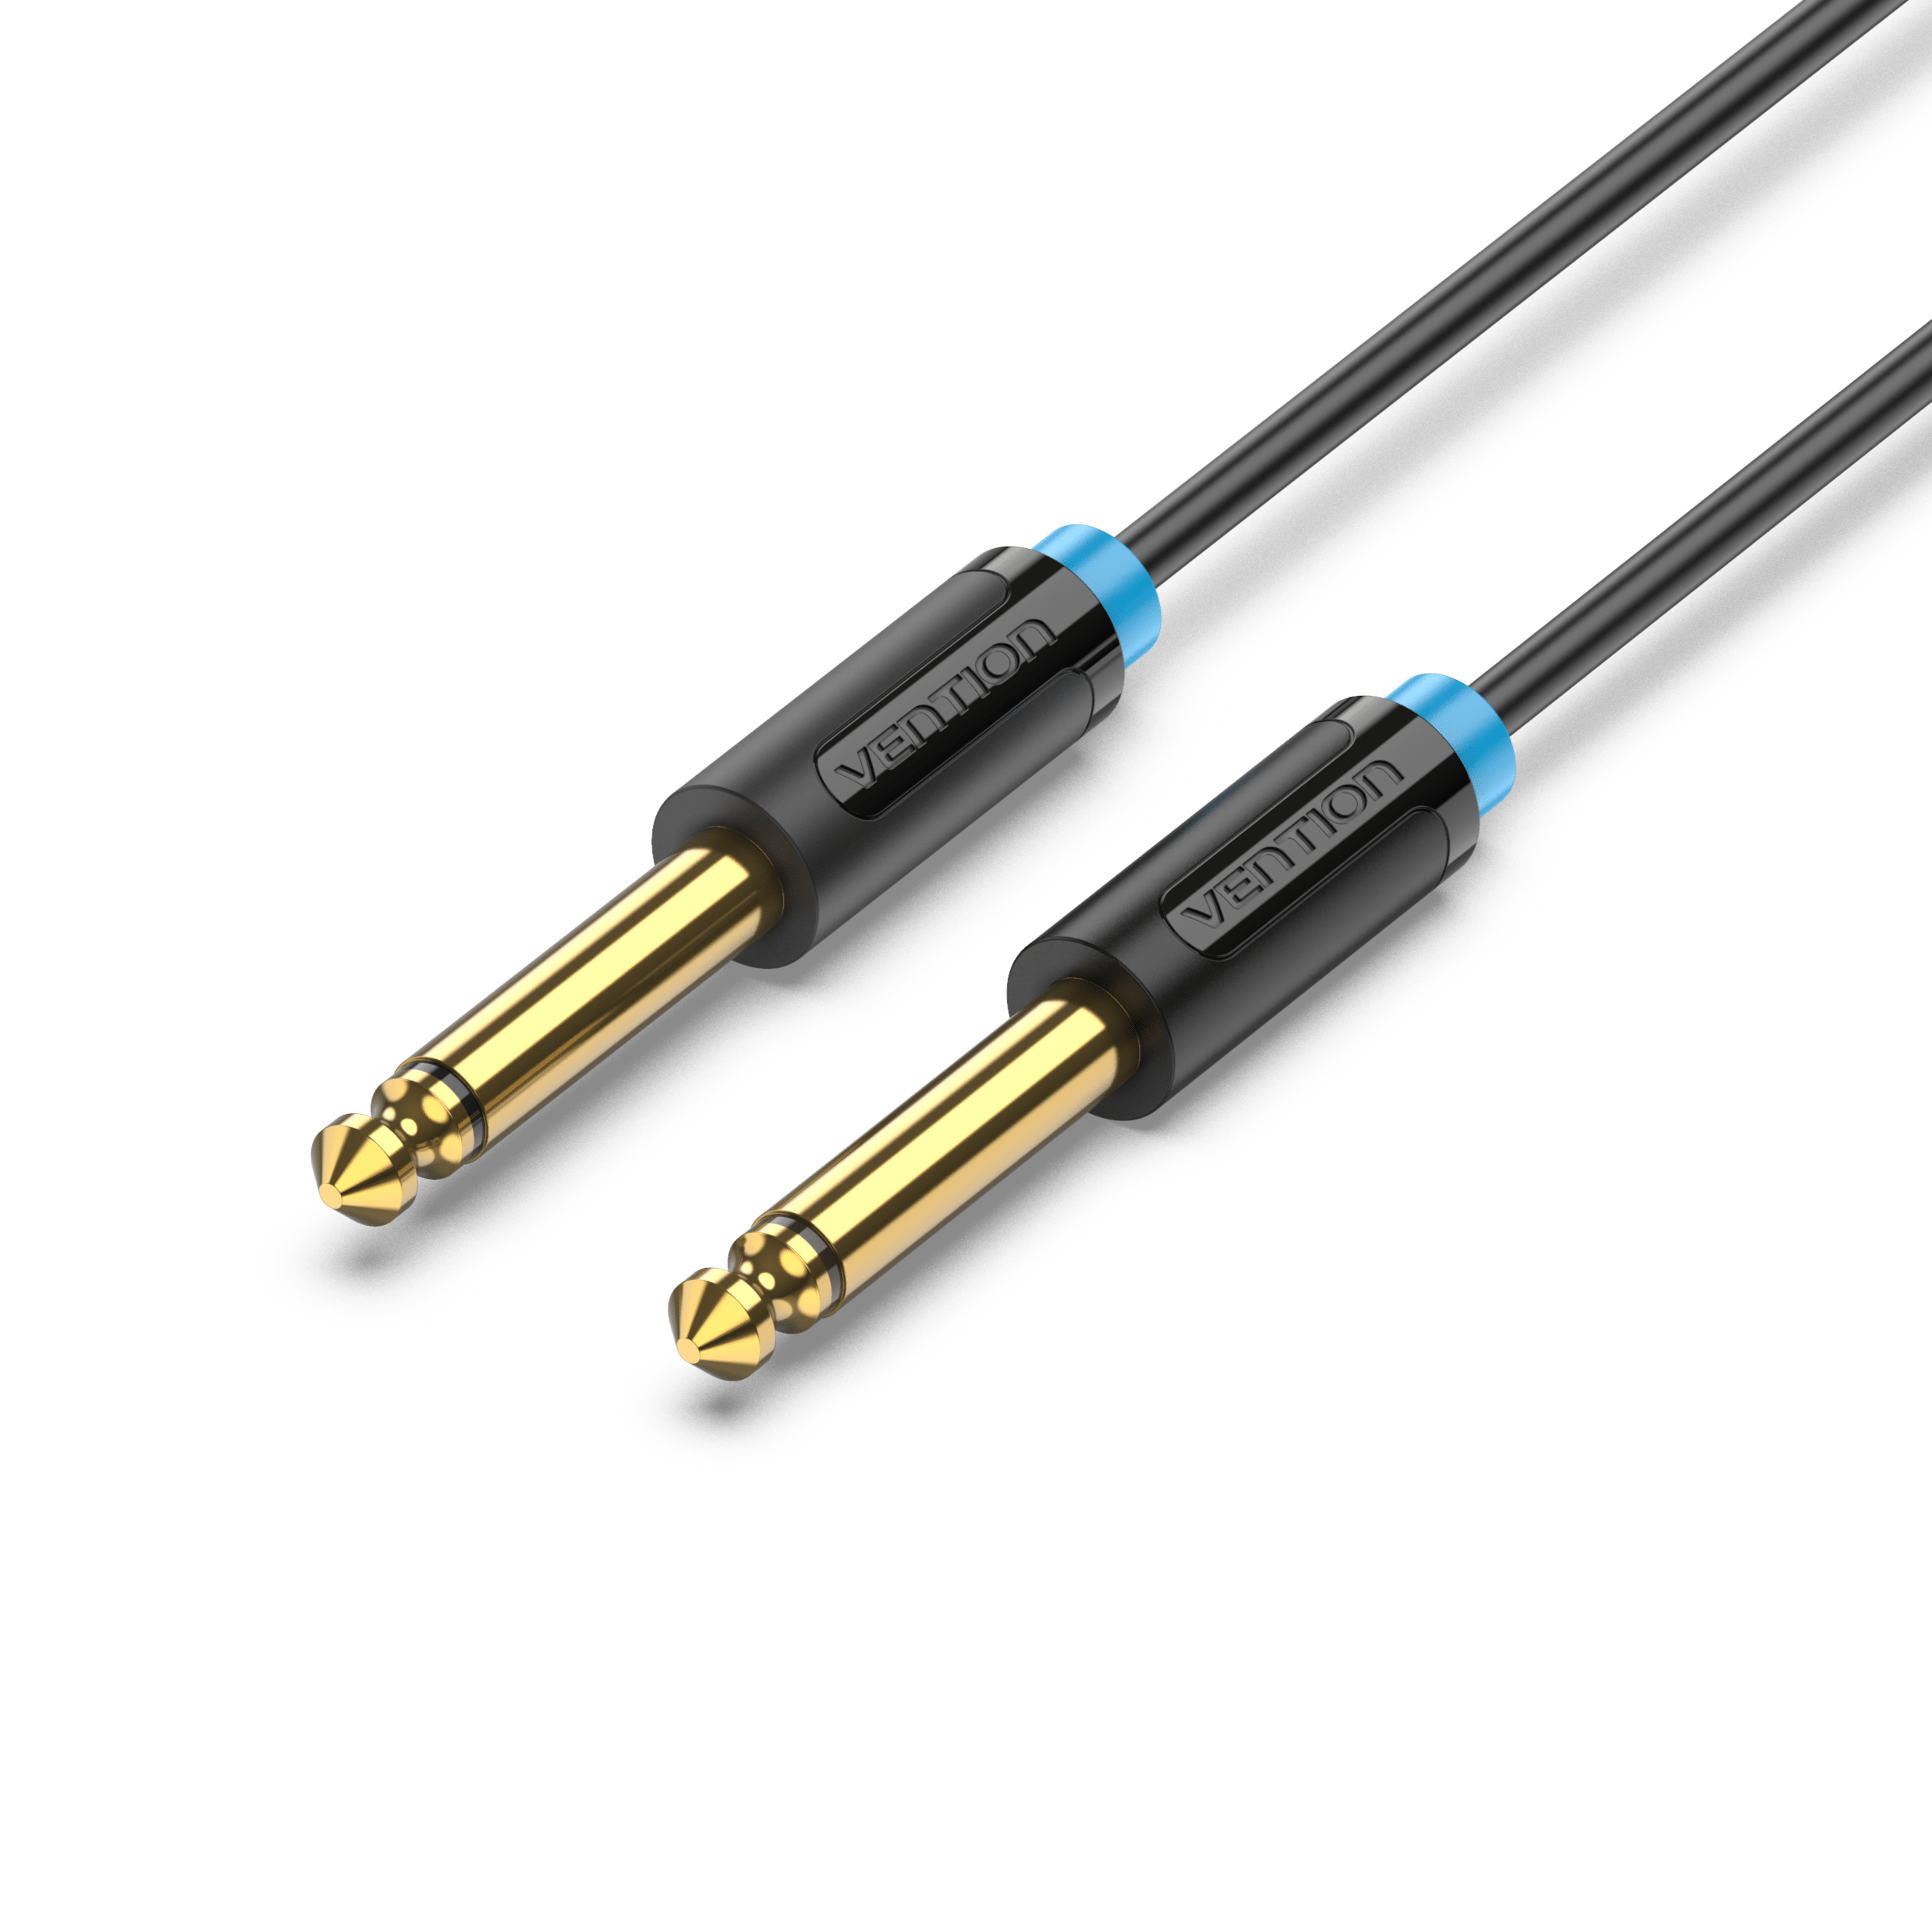 Residencia Civil Más temprano Aux Guitar Cable Jack 6.5 mm to 6.5 mm Audio Cable for Guitar Mixer Sp